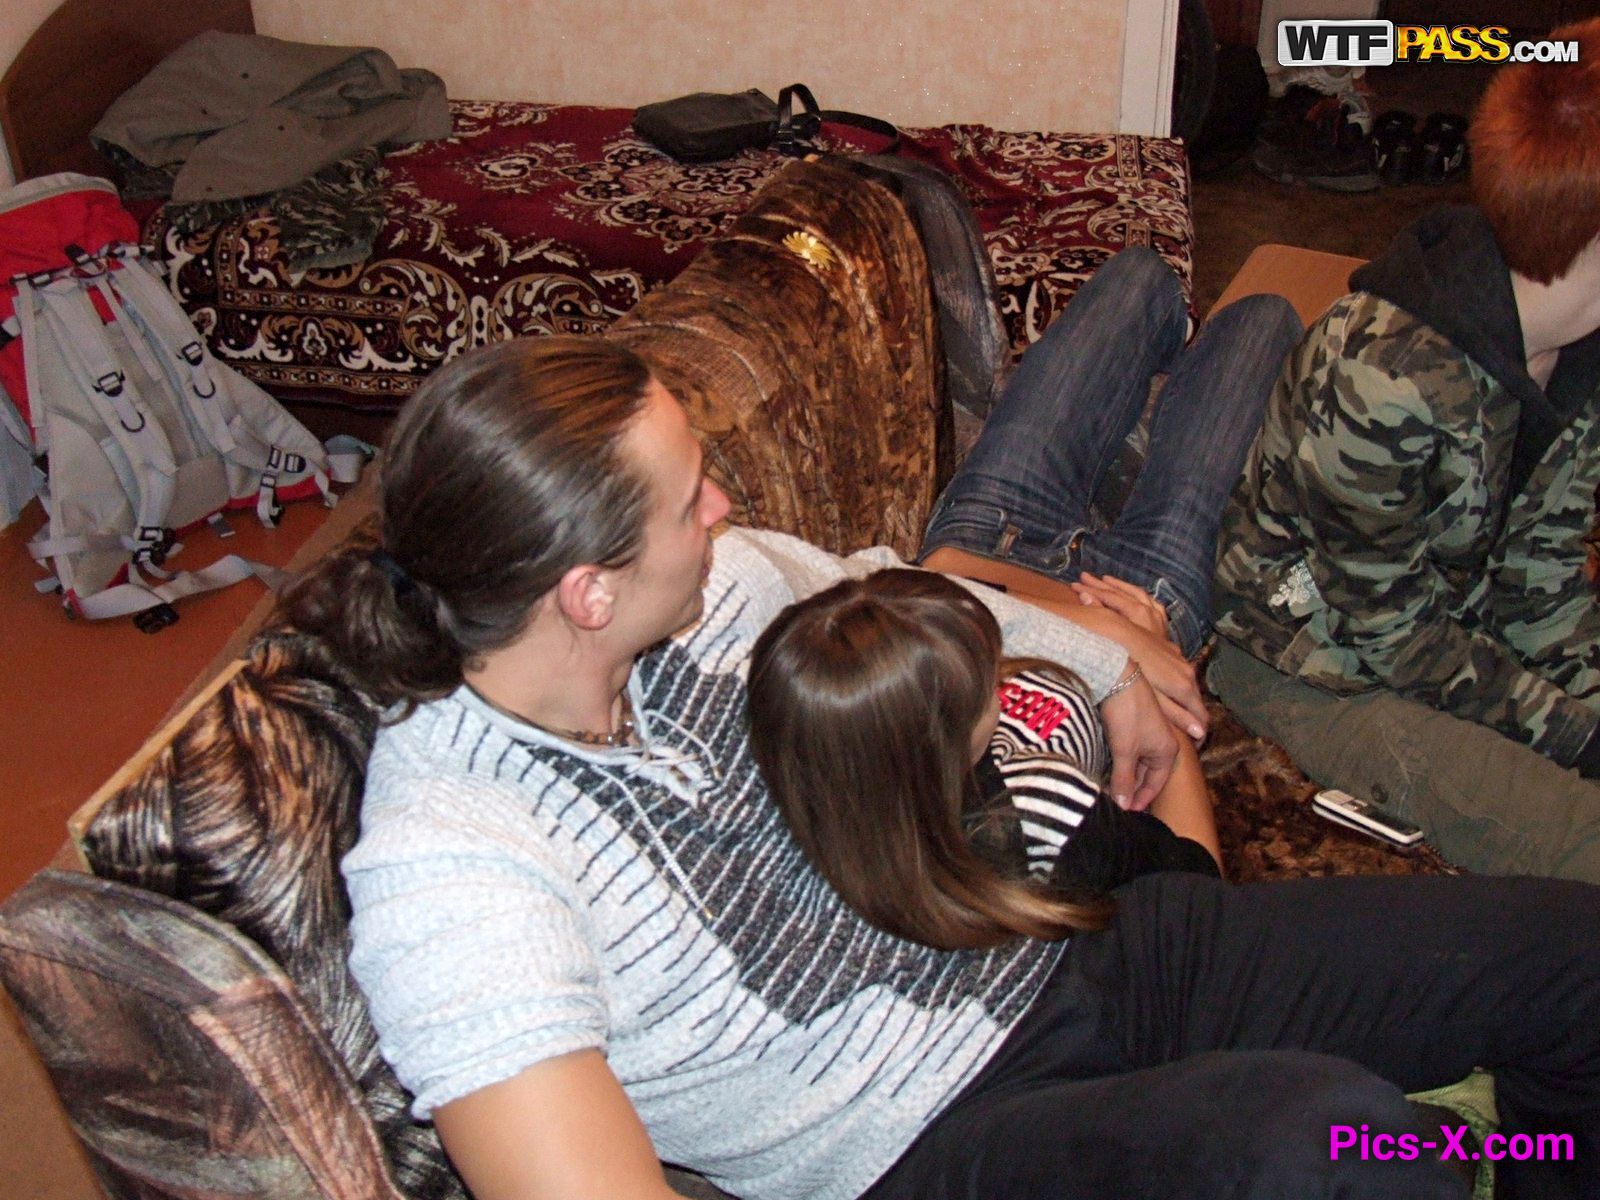 The dirtiest college sex party, part 4 - College Fuck Parties - Image 5